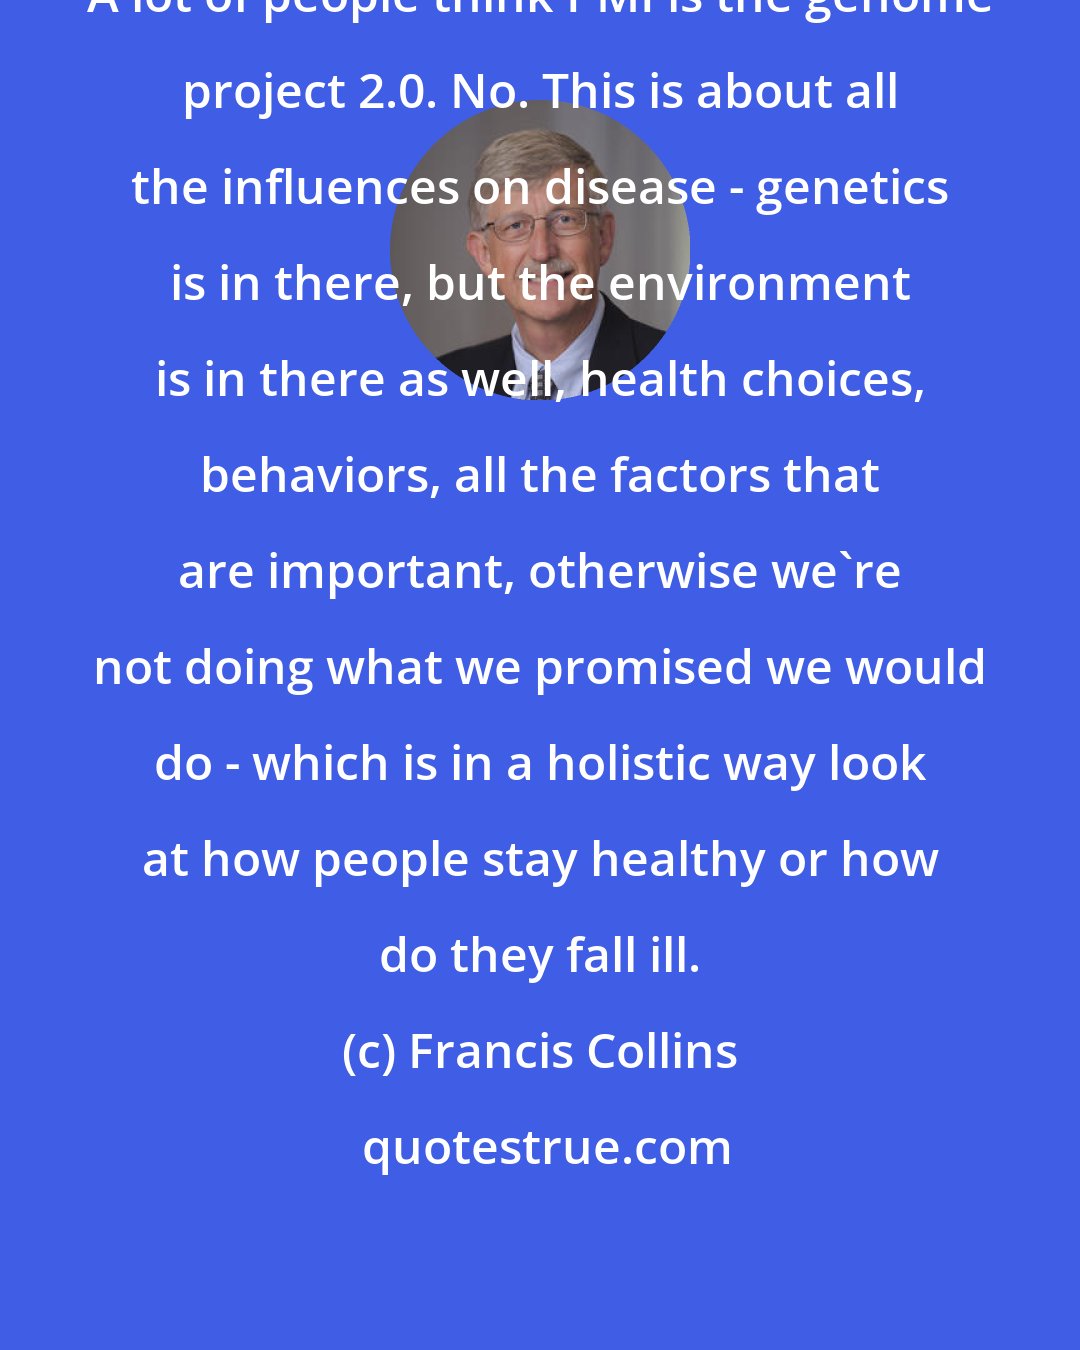 Francis Collins: A lot of people think PMI is the genome project 2.0. No. This is about all the influences on disease - genetics is in there, but the environment is in there as well, health choices, behaviors, all the factors that are important, otherwise we're not doing what we promised we would do - which is in a holistic way look at how people stay healthy or how do they fall ill.